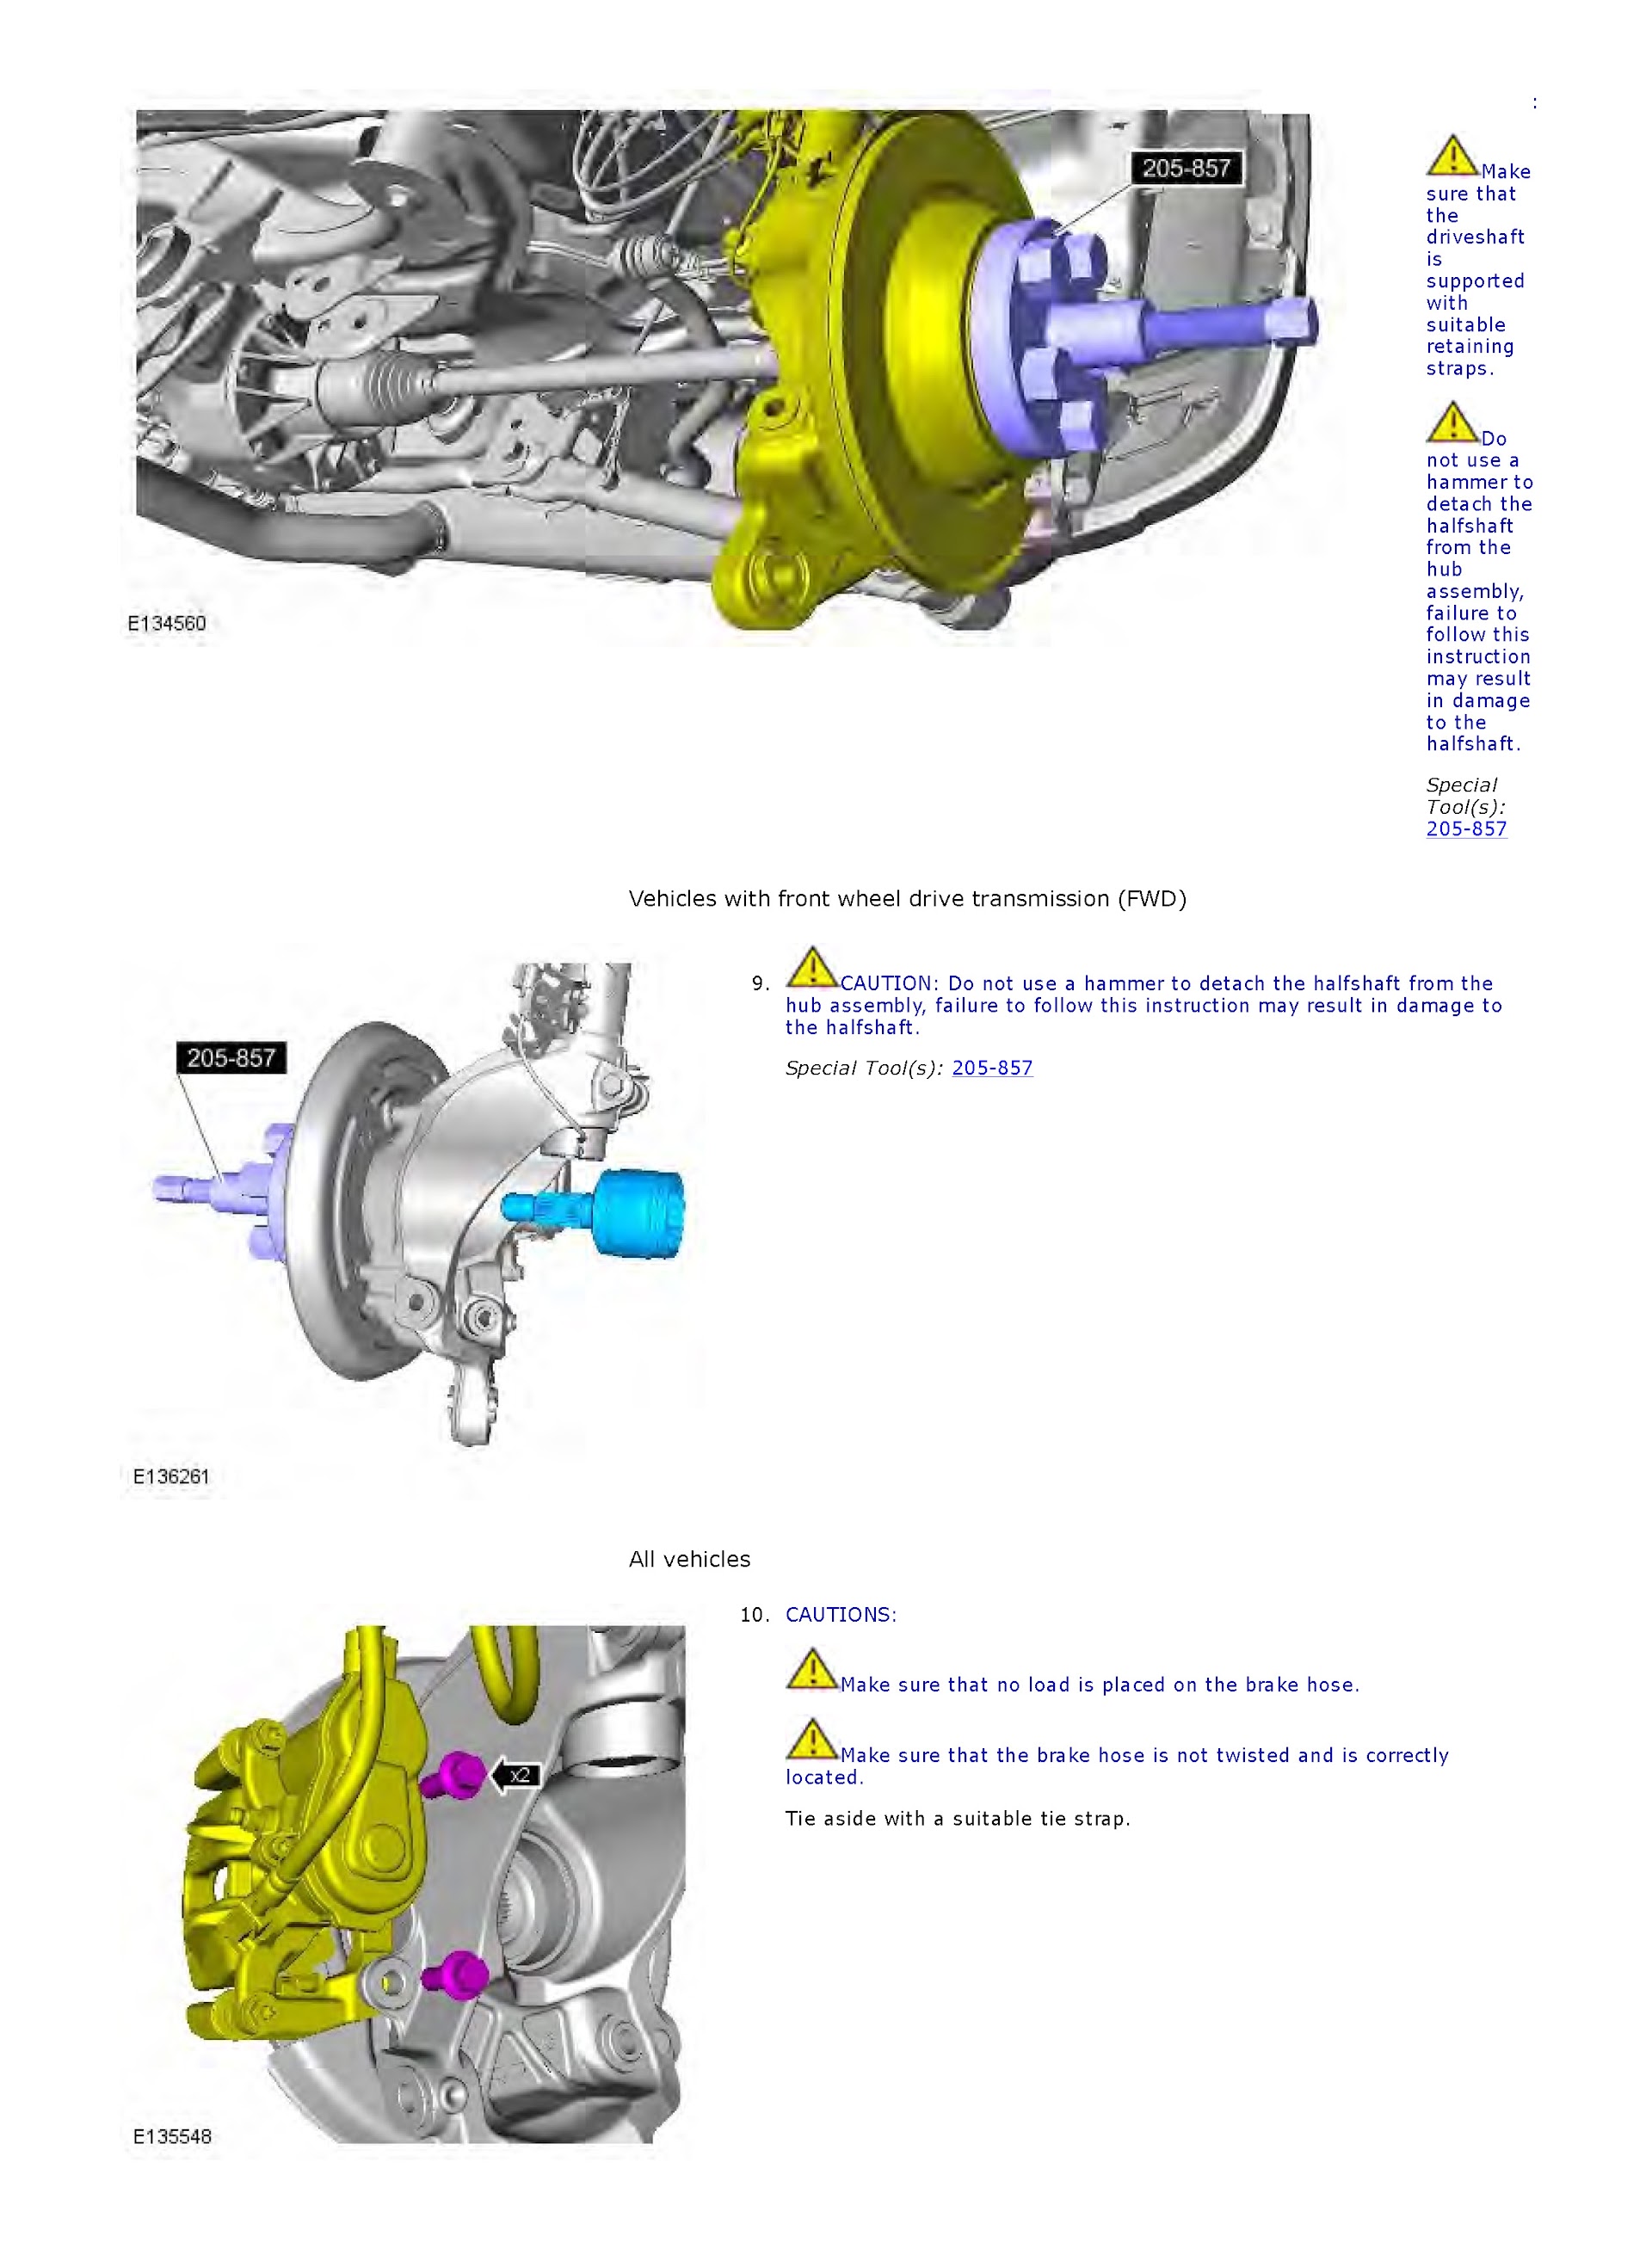 2014 Range Rover Evoque Repair Manual, Driveshaft Assembly